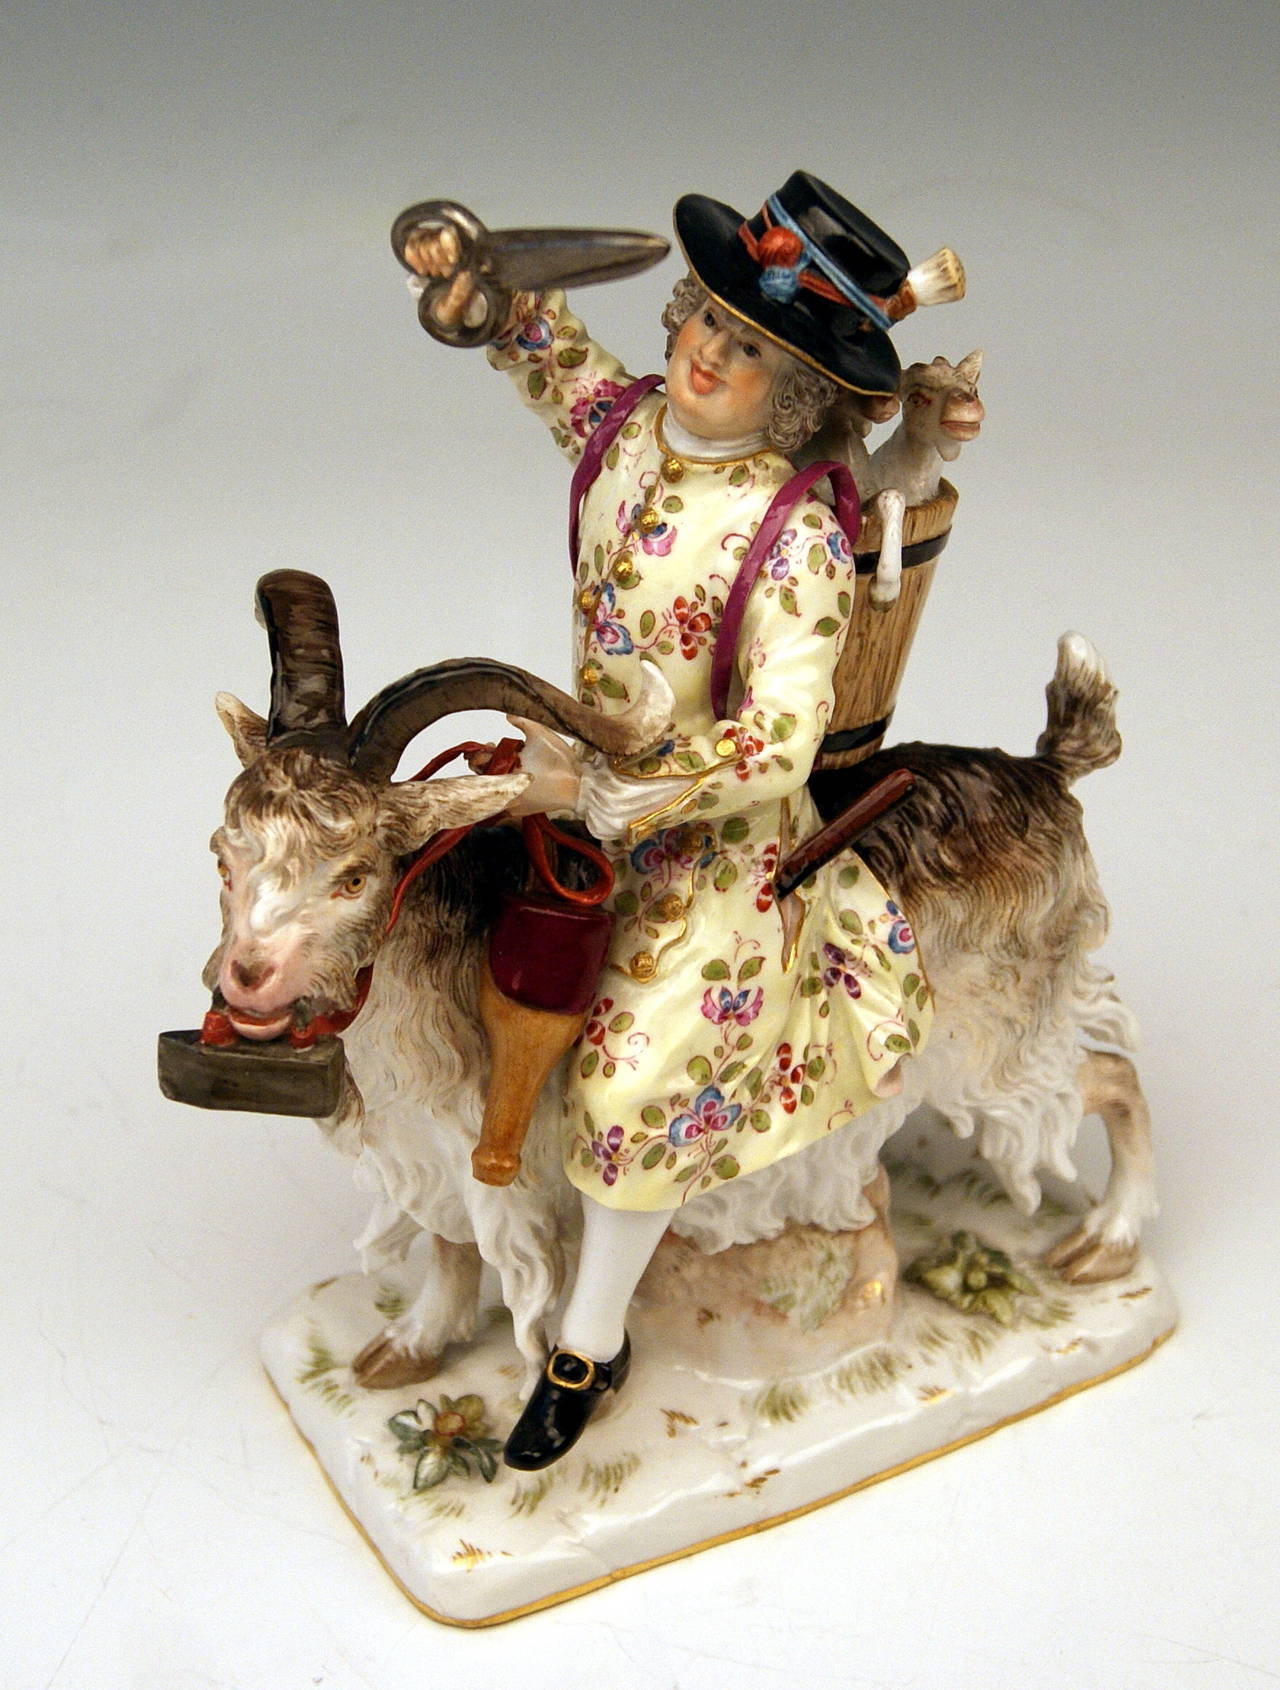 Late 19th Century Meissen Figurine Group by Kändler Tailor of Count Bruehl on a Goat, circa 1870